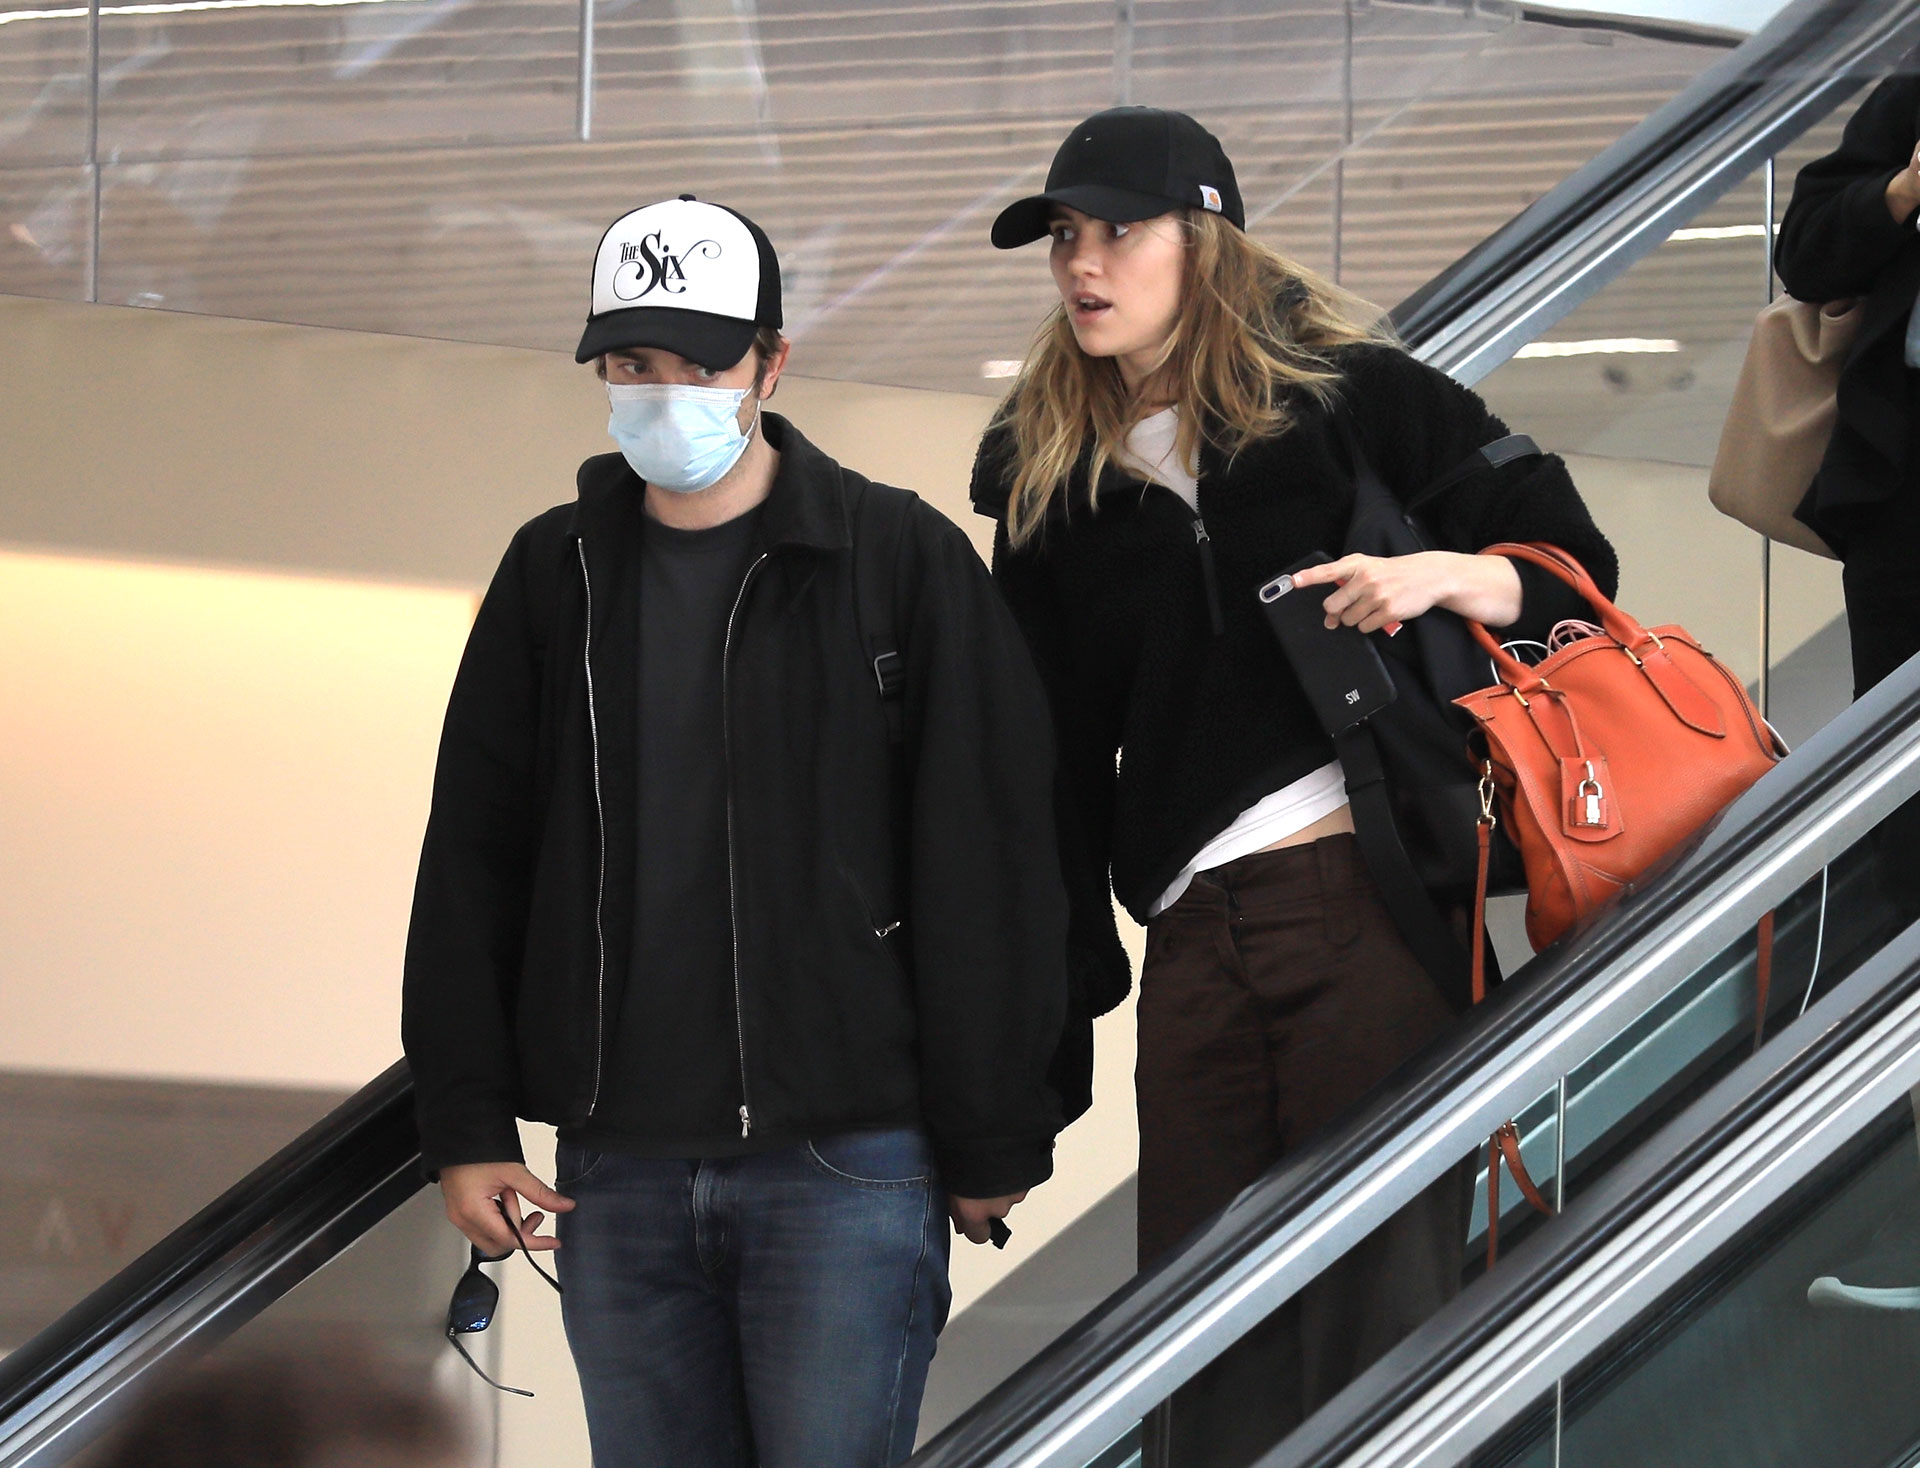 Robert Pattinson and Suki Waterhouse were photographed at the Los Angeles airport, where they arrived after enjoying a trip for their five-year relationship.  The actor tried to go unnoticed by taking advantage of the use of the mask and added a cap, while she also wore an accessory on her head